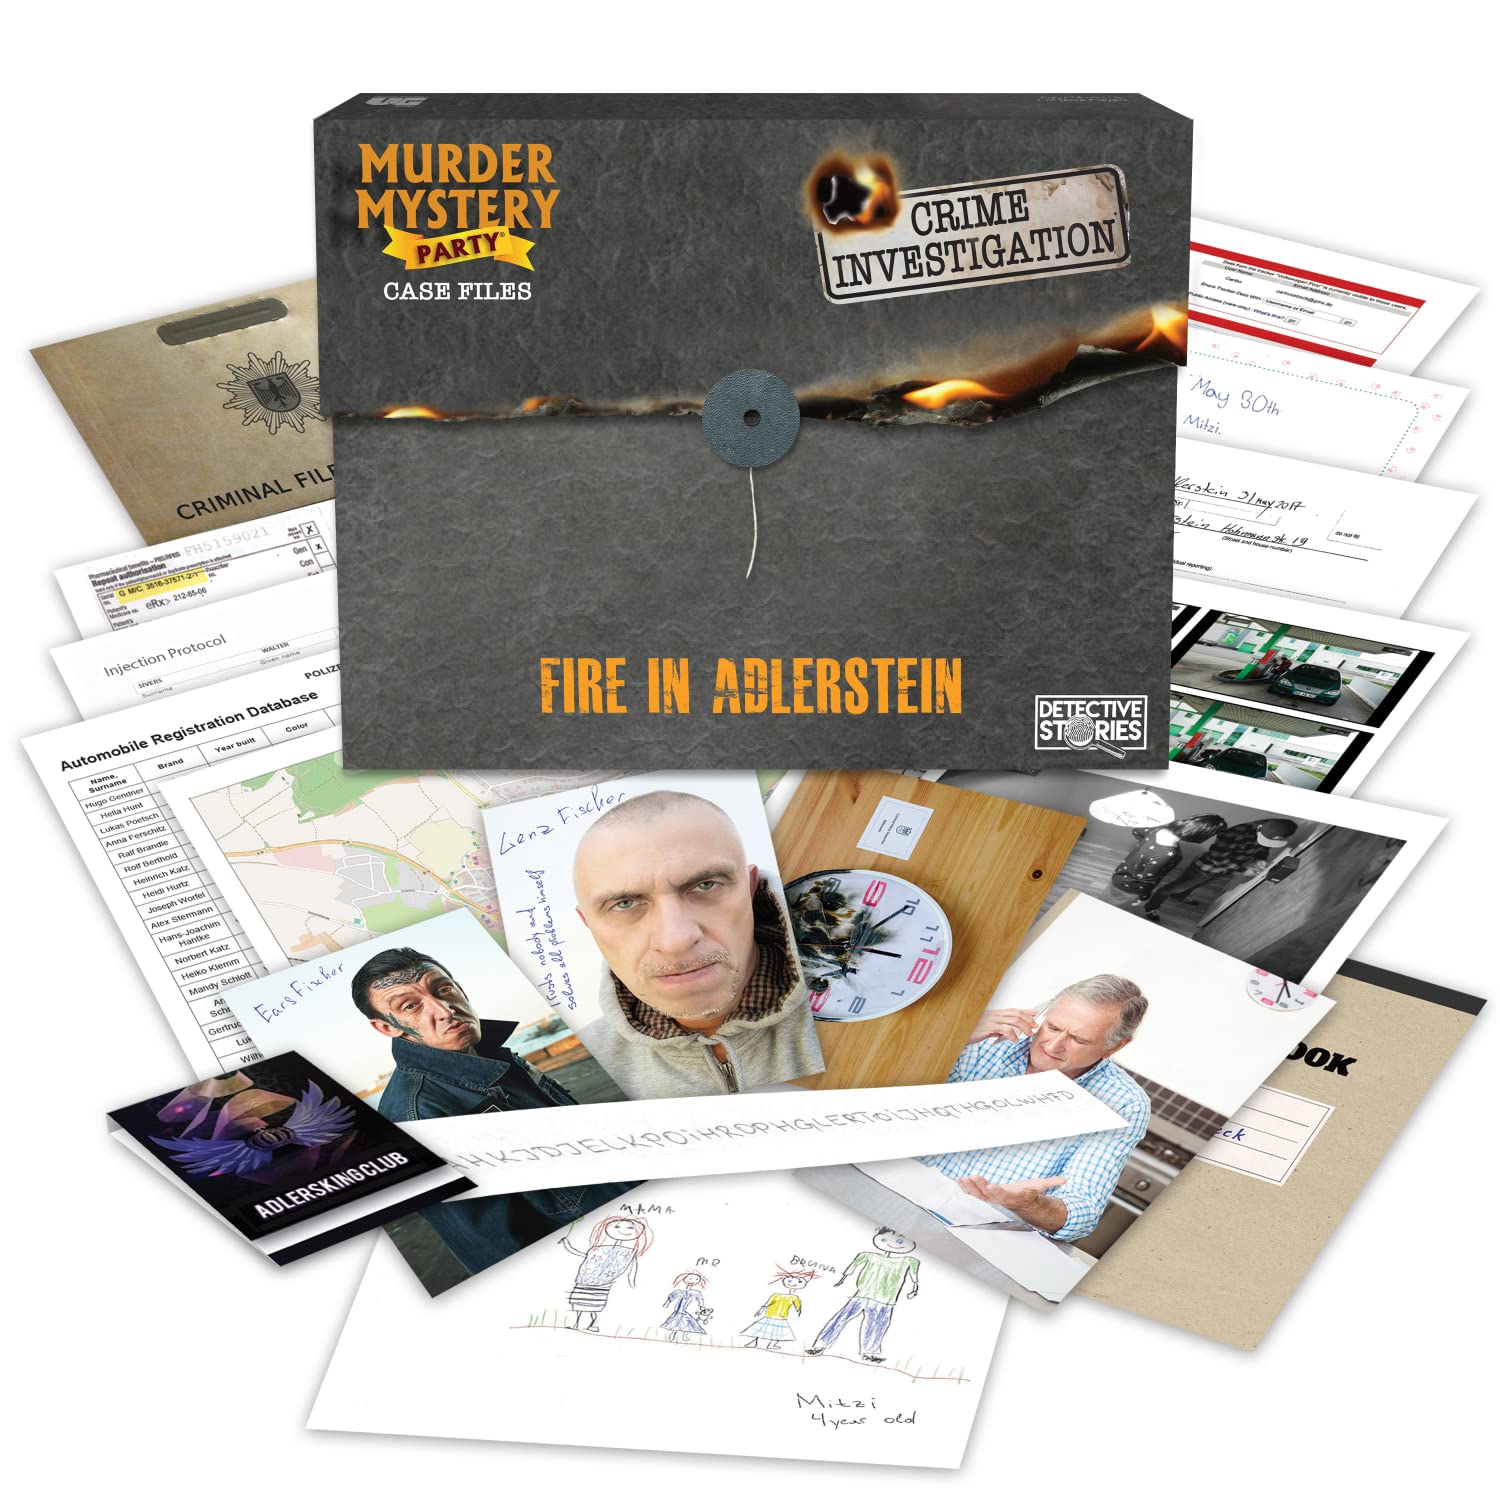 Murder Mystery Party Case Files: Fire in Adlerstein Unsolved Mystery Detective Game Play Alone, w/ Friends, Family or for Couples Date Night Ages 14+ from University Games , Grey